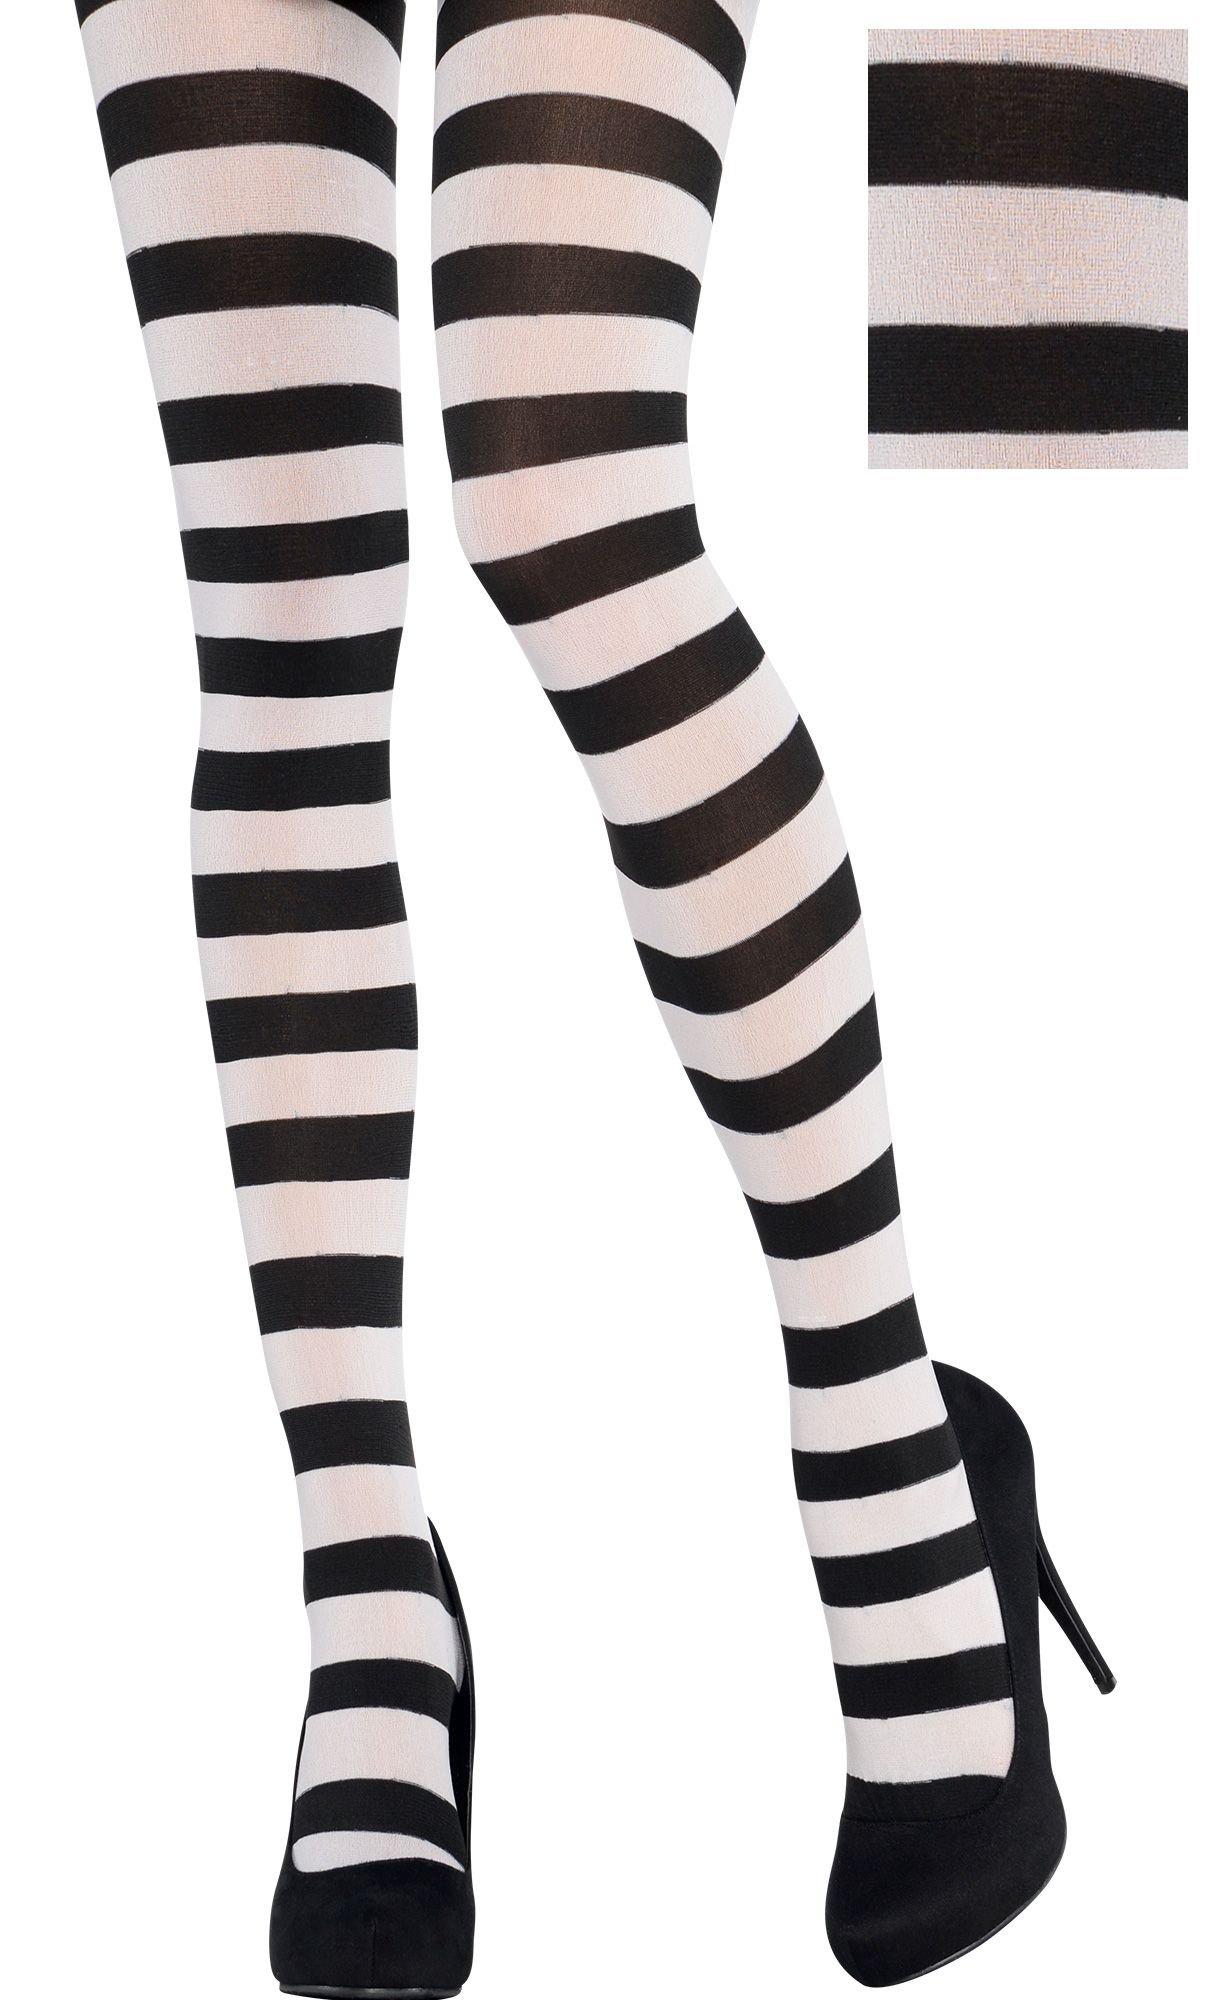 Adult Black & White Striped Tights | Party City